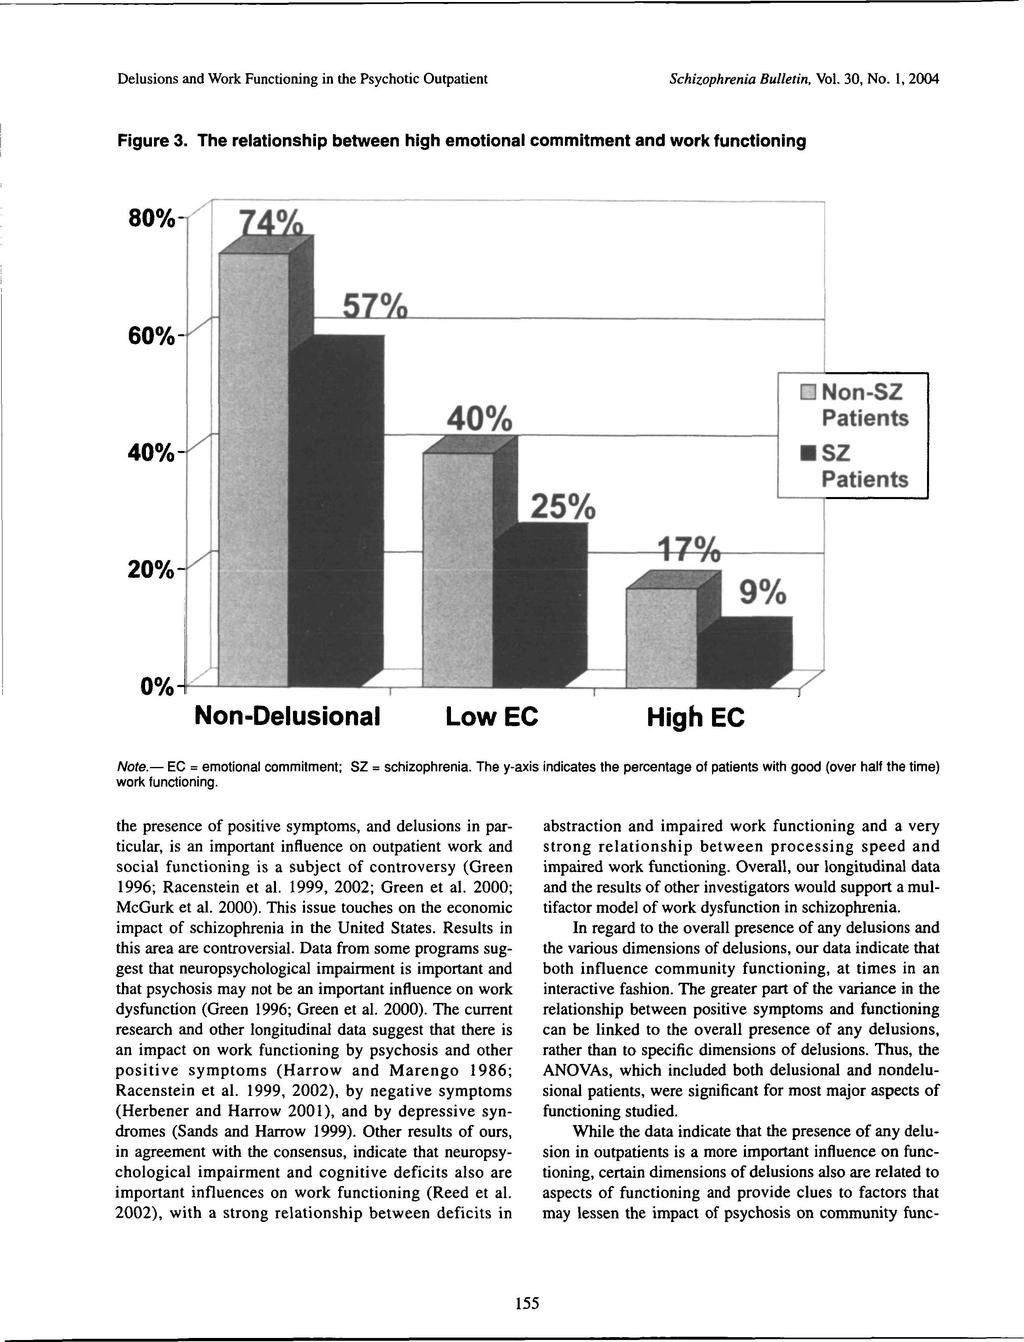 Delusions and Work Functioning in the Psychotic Outpatient Schizophrenia Bulletin, Vol. 30, No. 1, 2004 Figure 3.